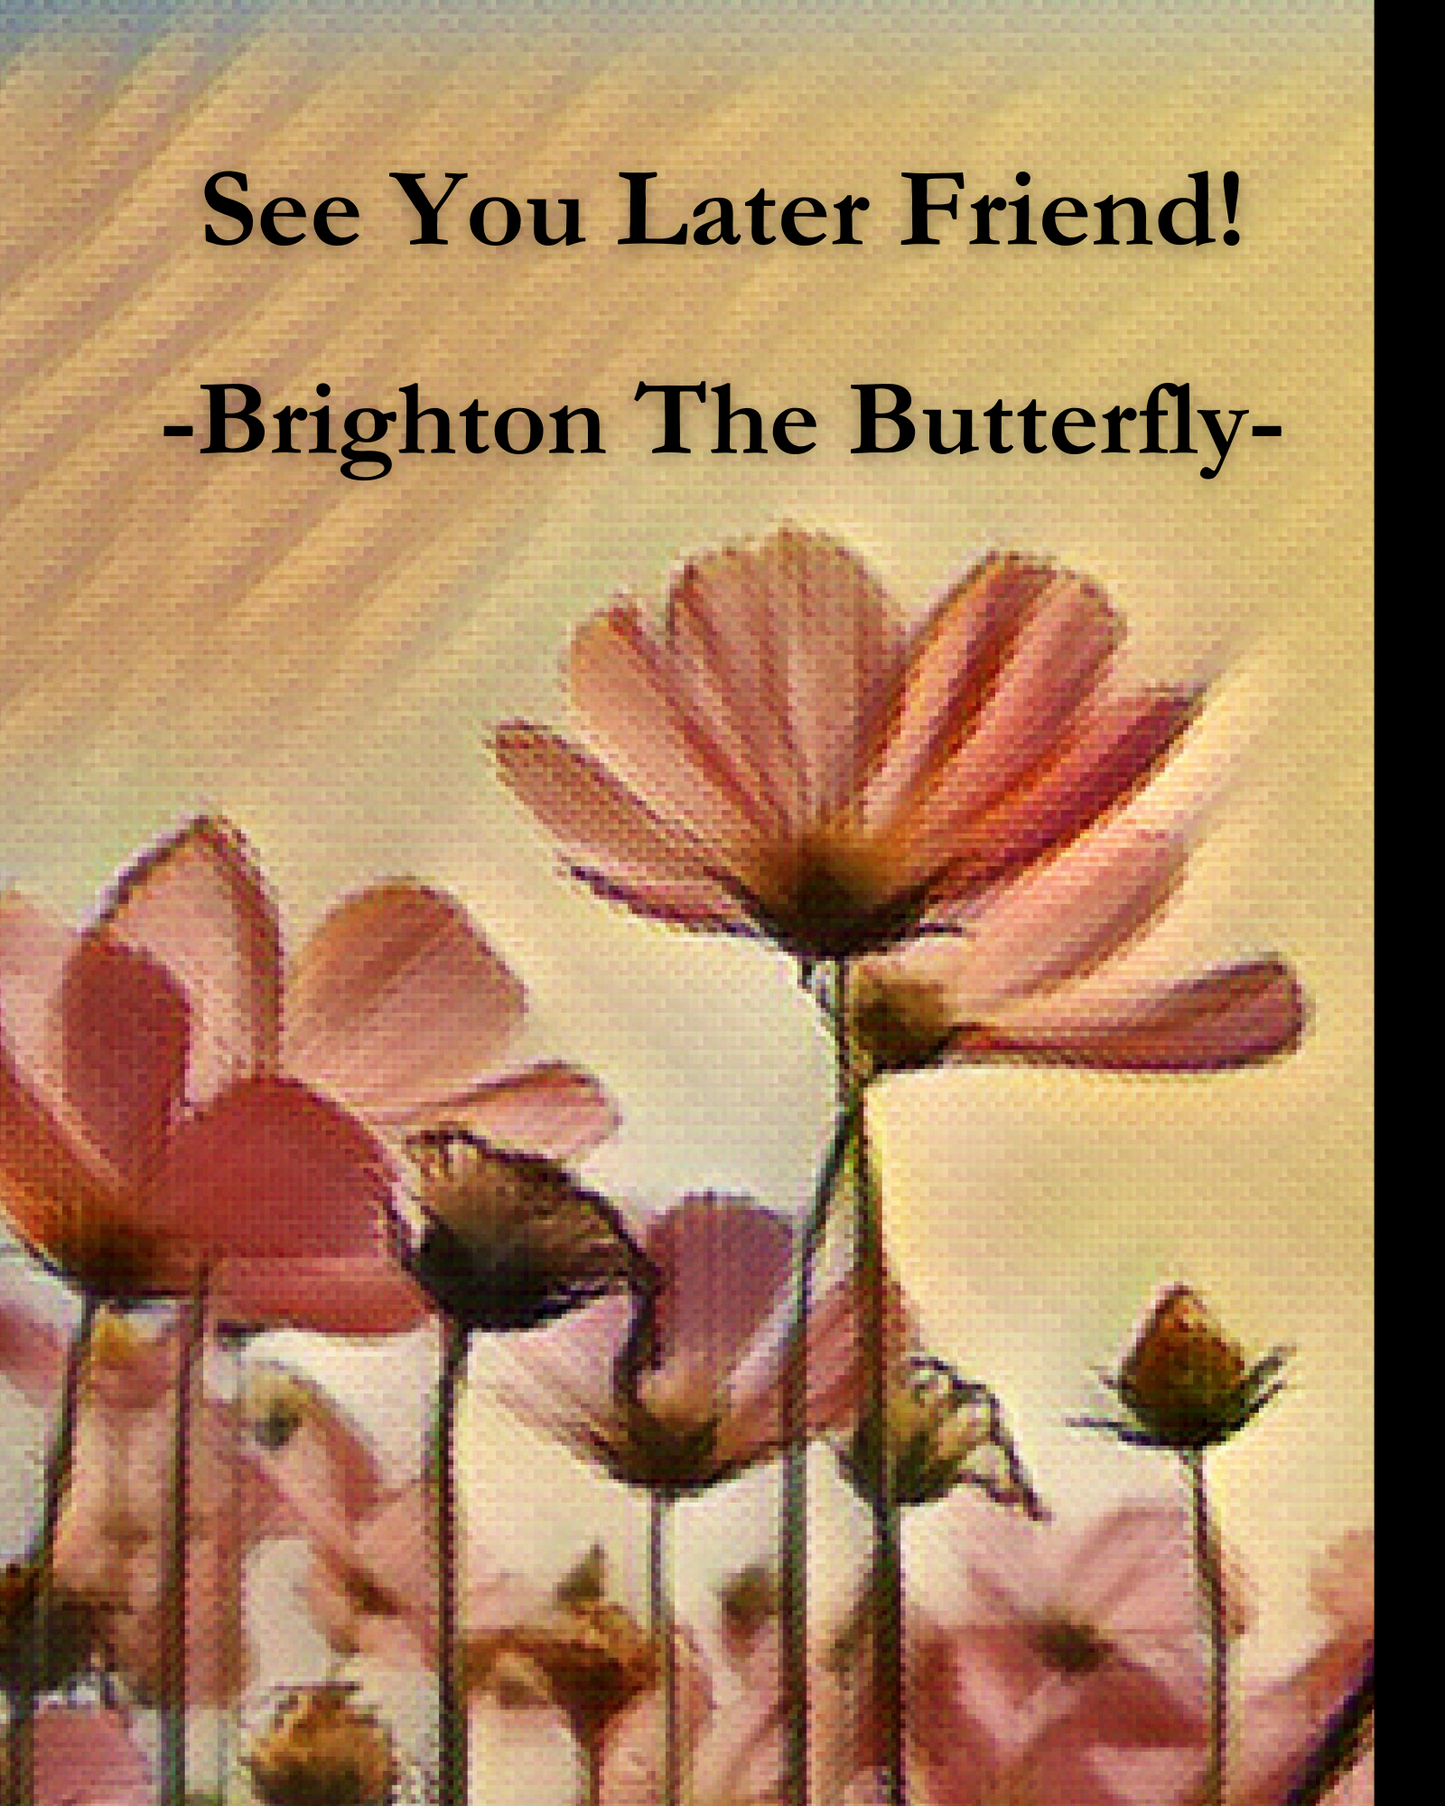 Brighton The Butterfly